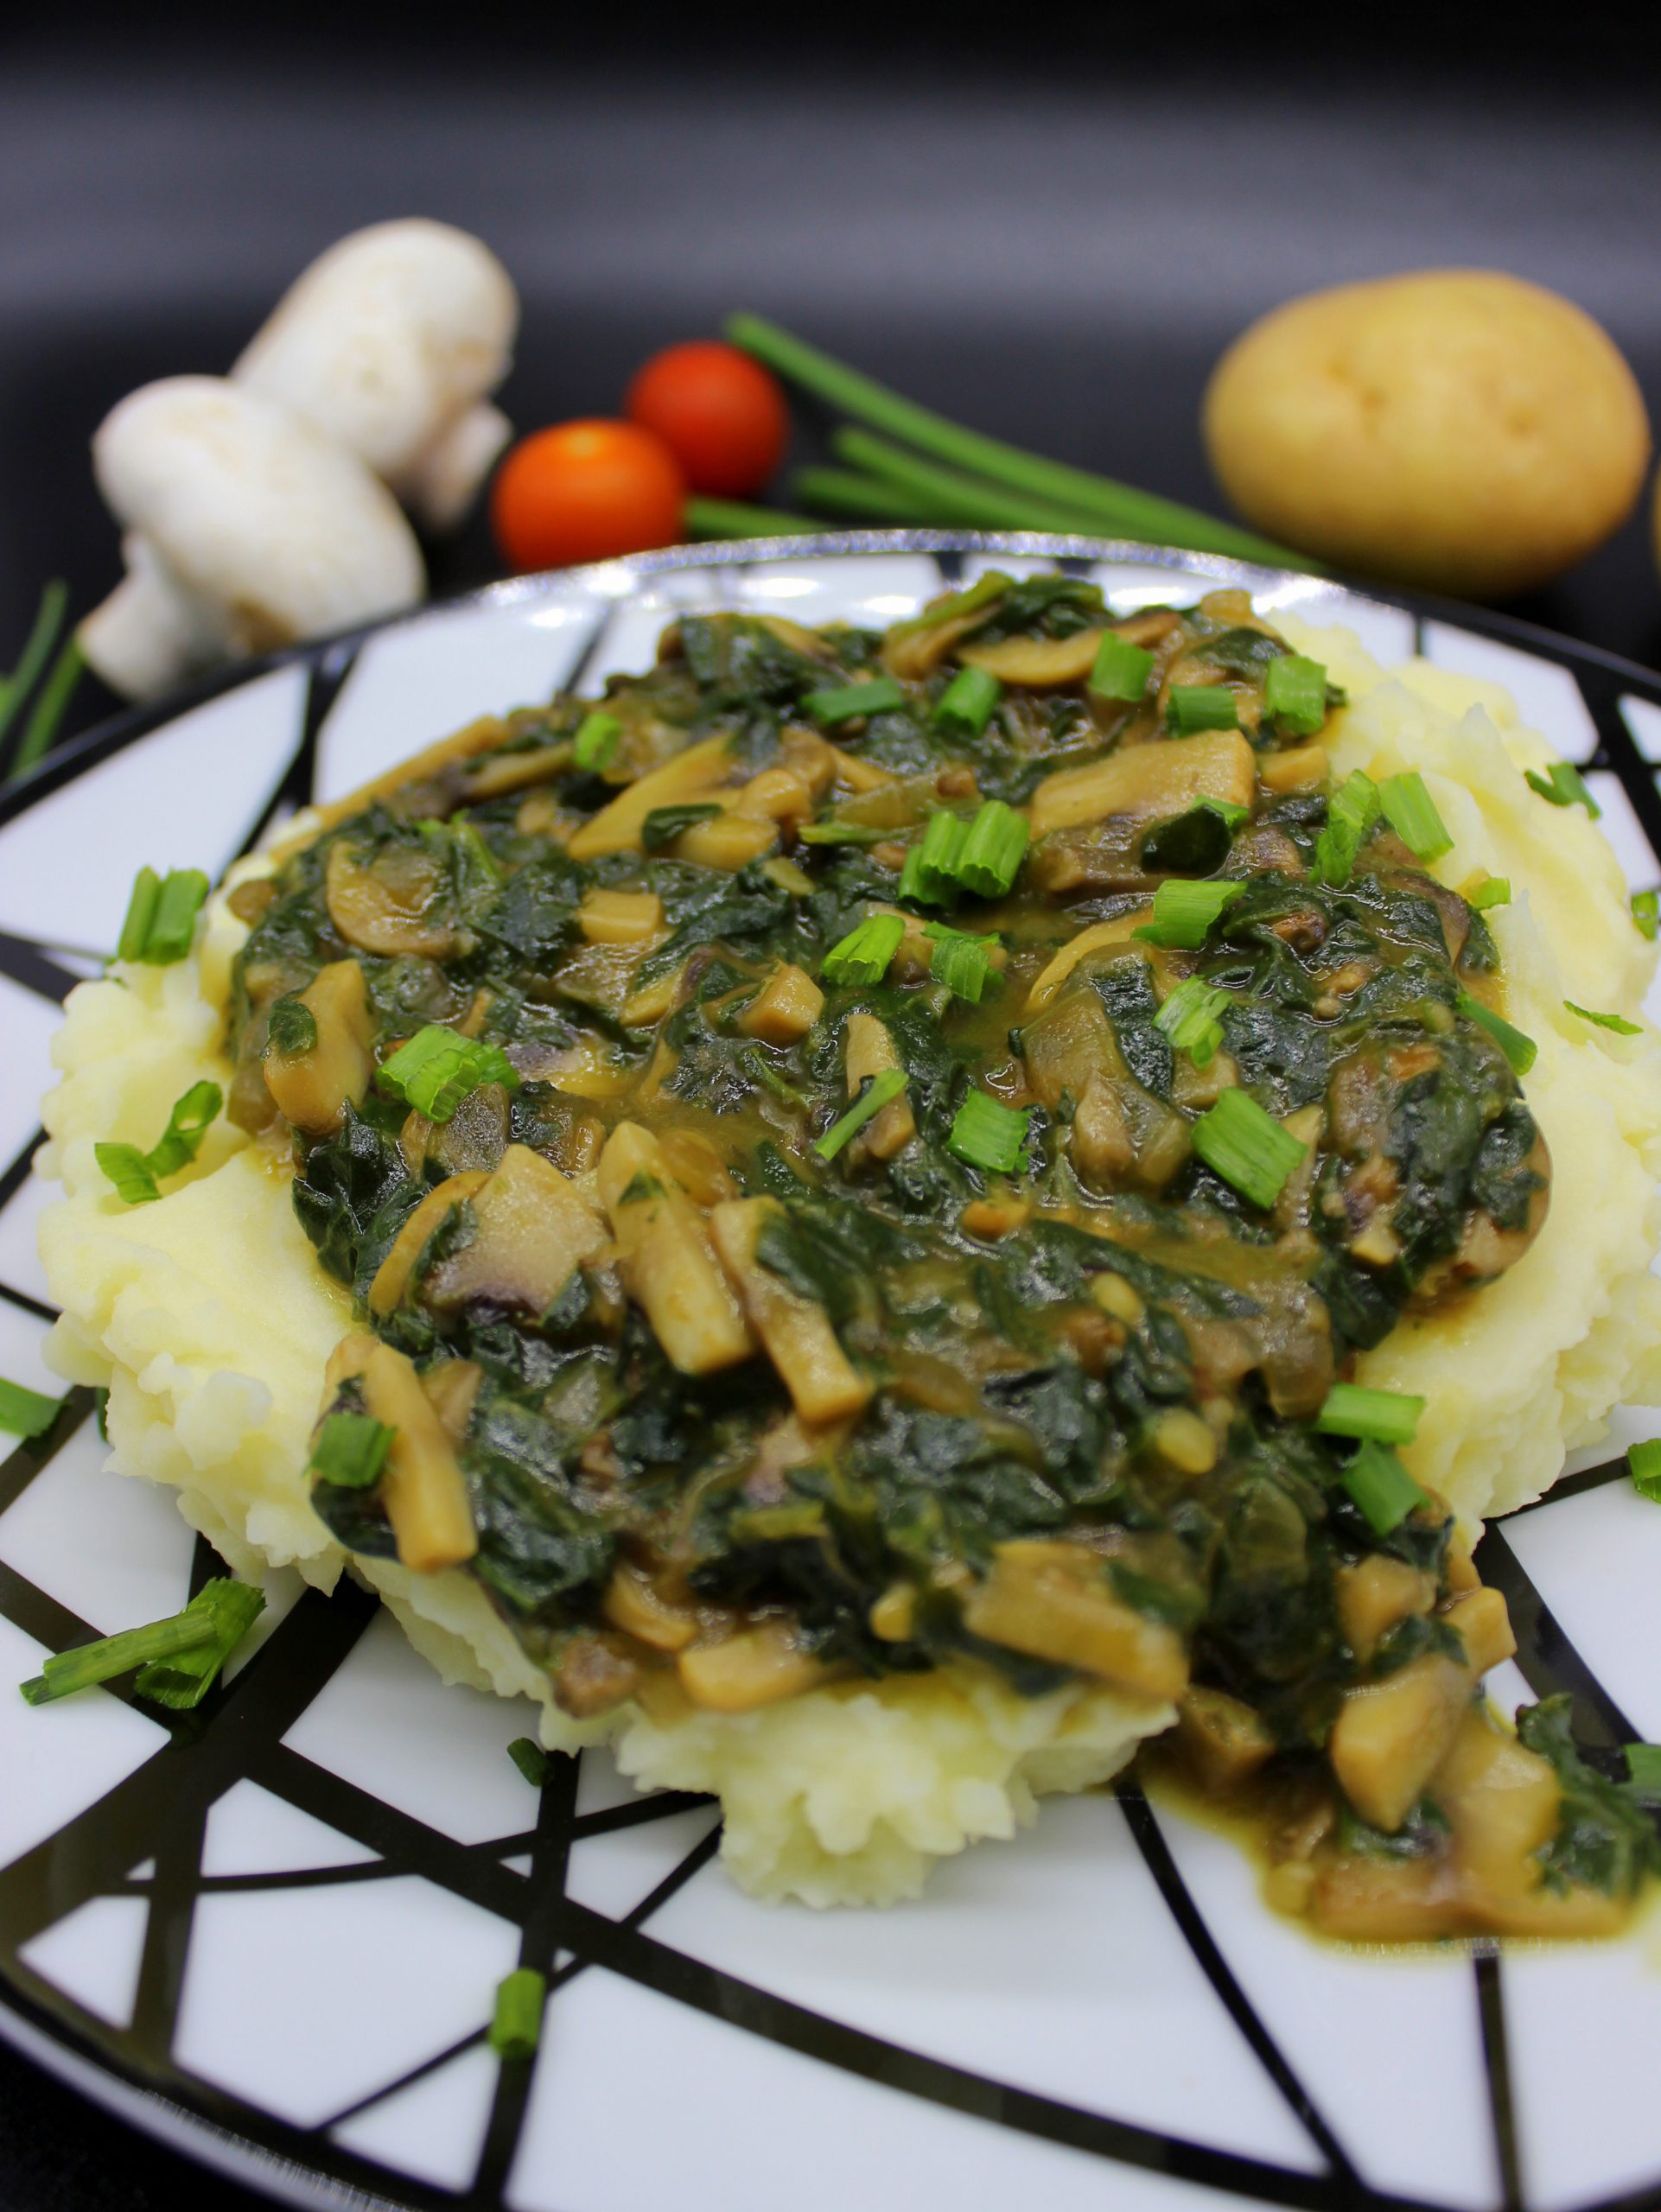 Vegan mashed potatoes with mushroom and spinach gravy - Bunny Mommy Cooks